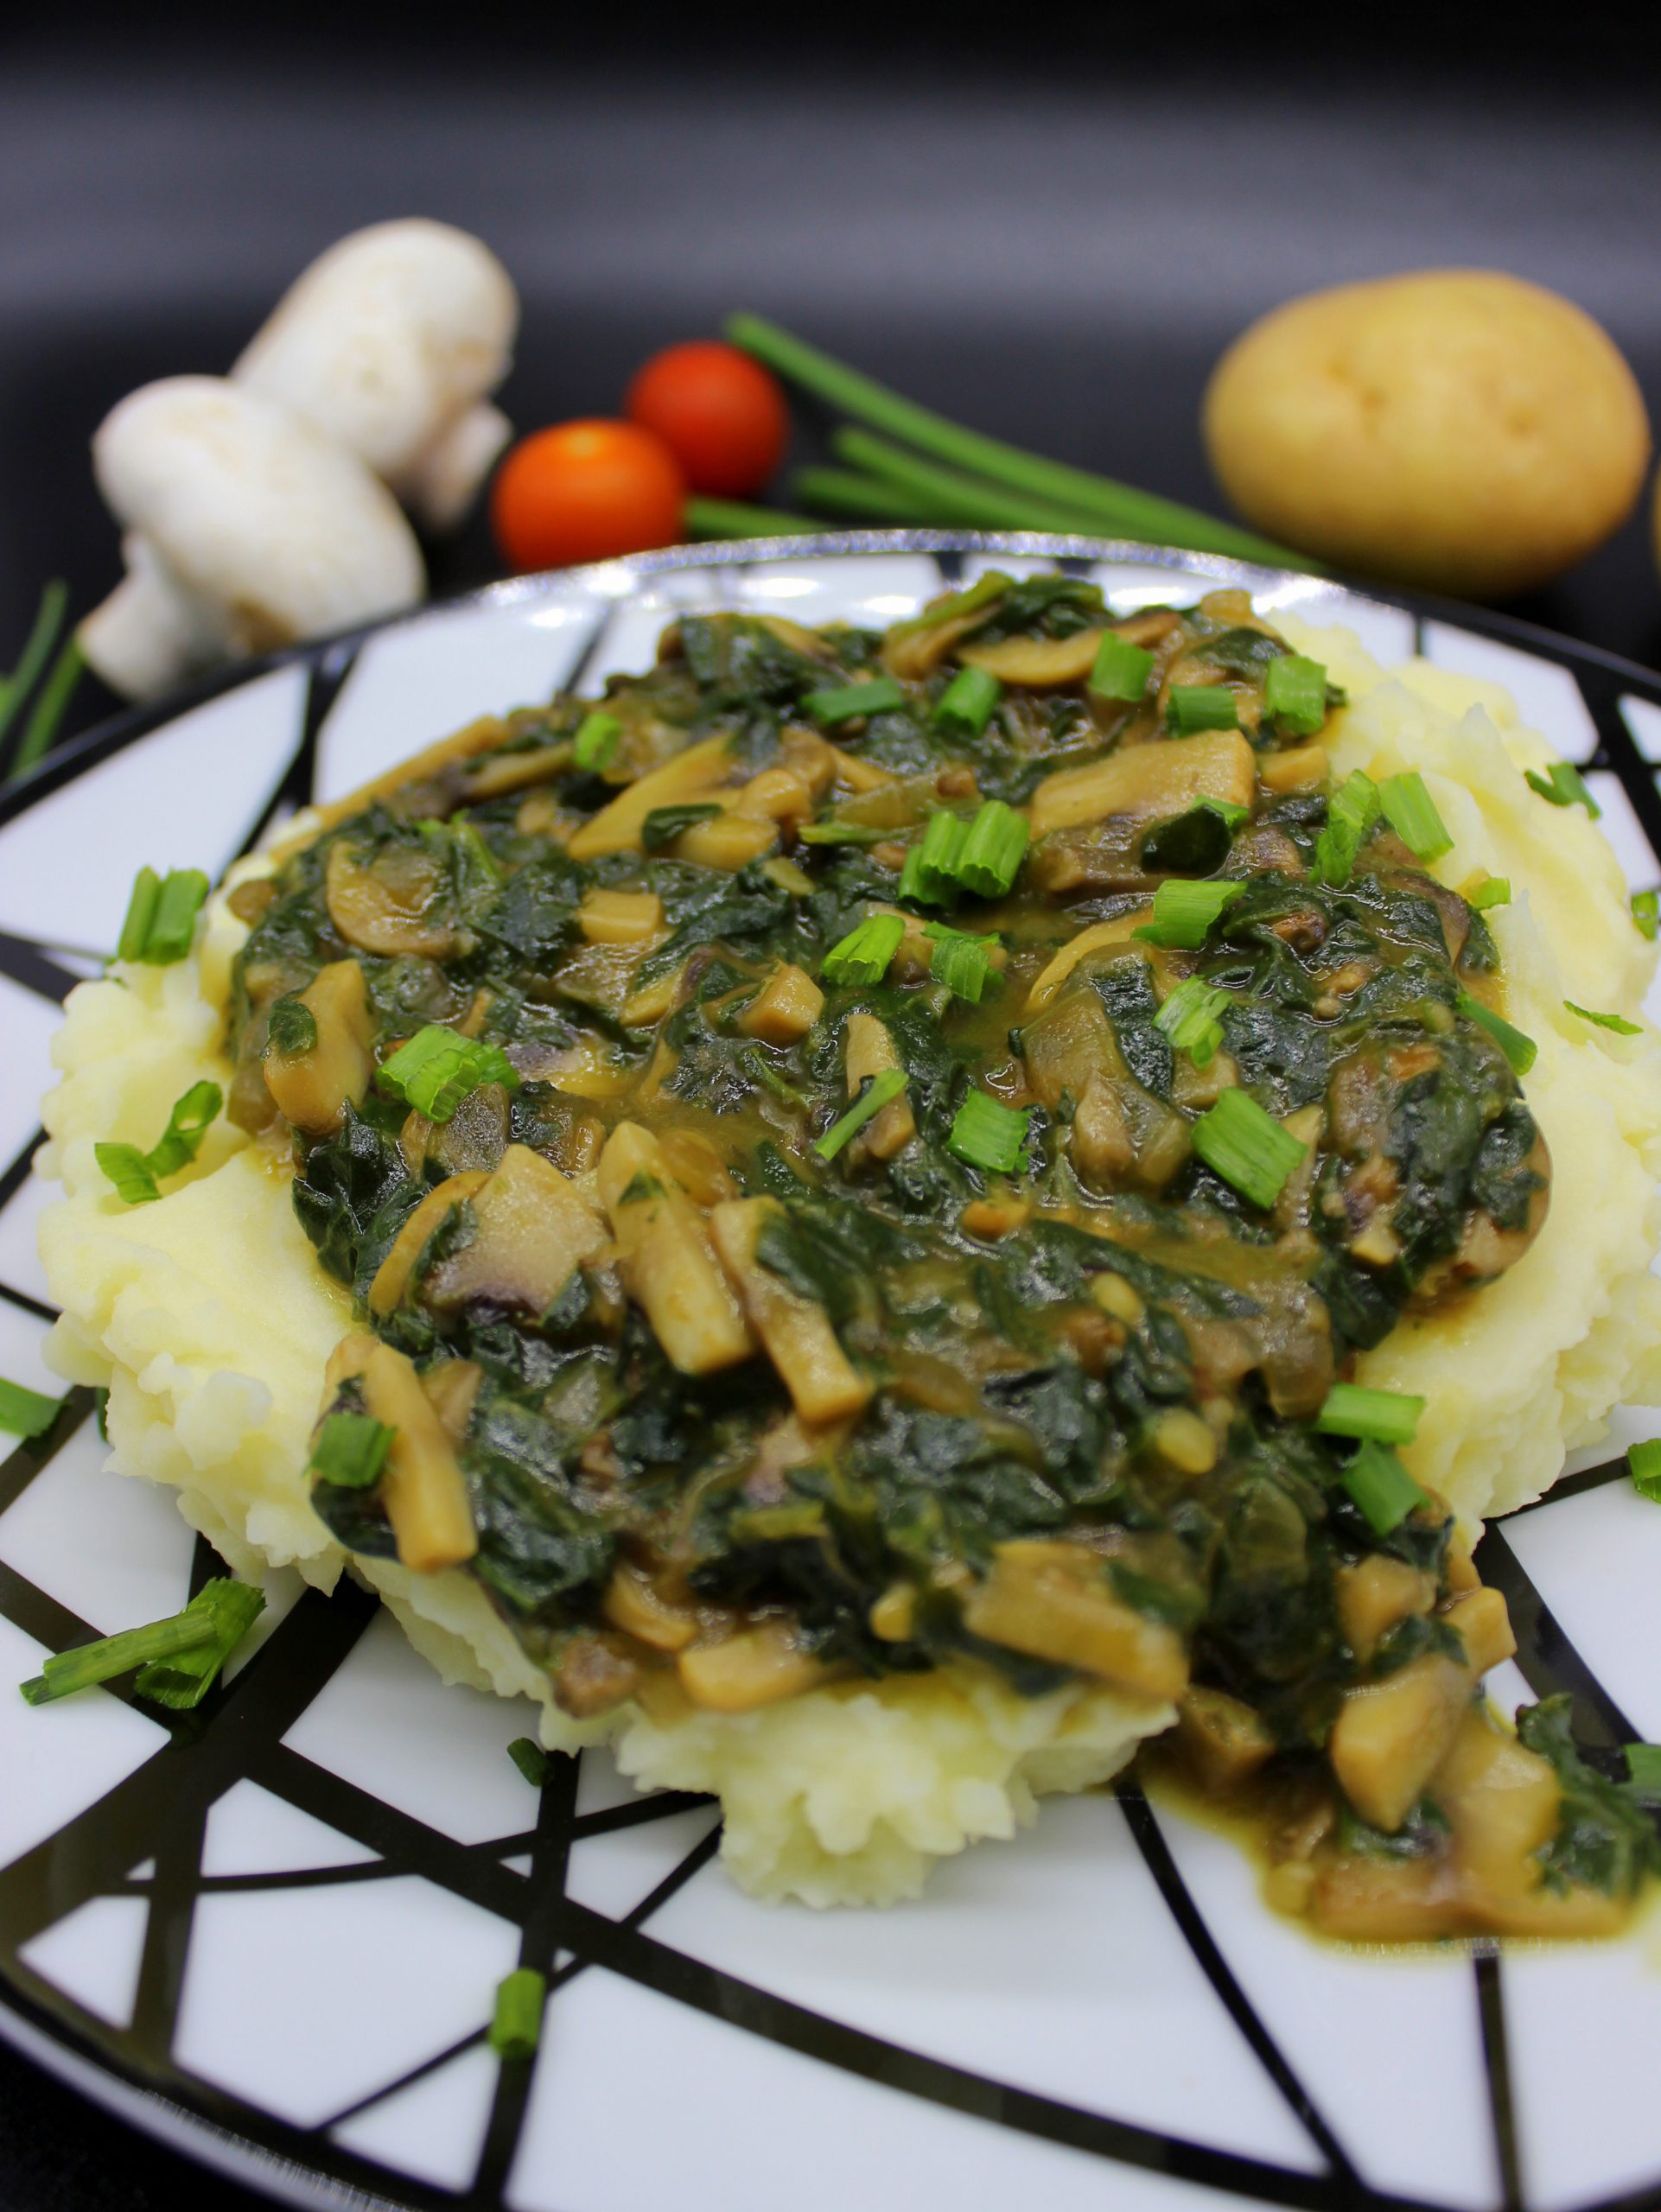 Vegan mashed potatoes with mushroom and spinach gravy - Bunny Mommy Cooks